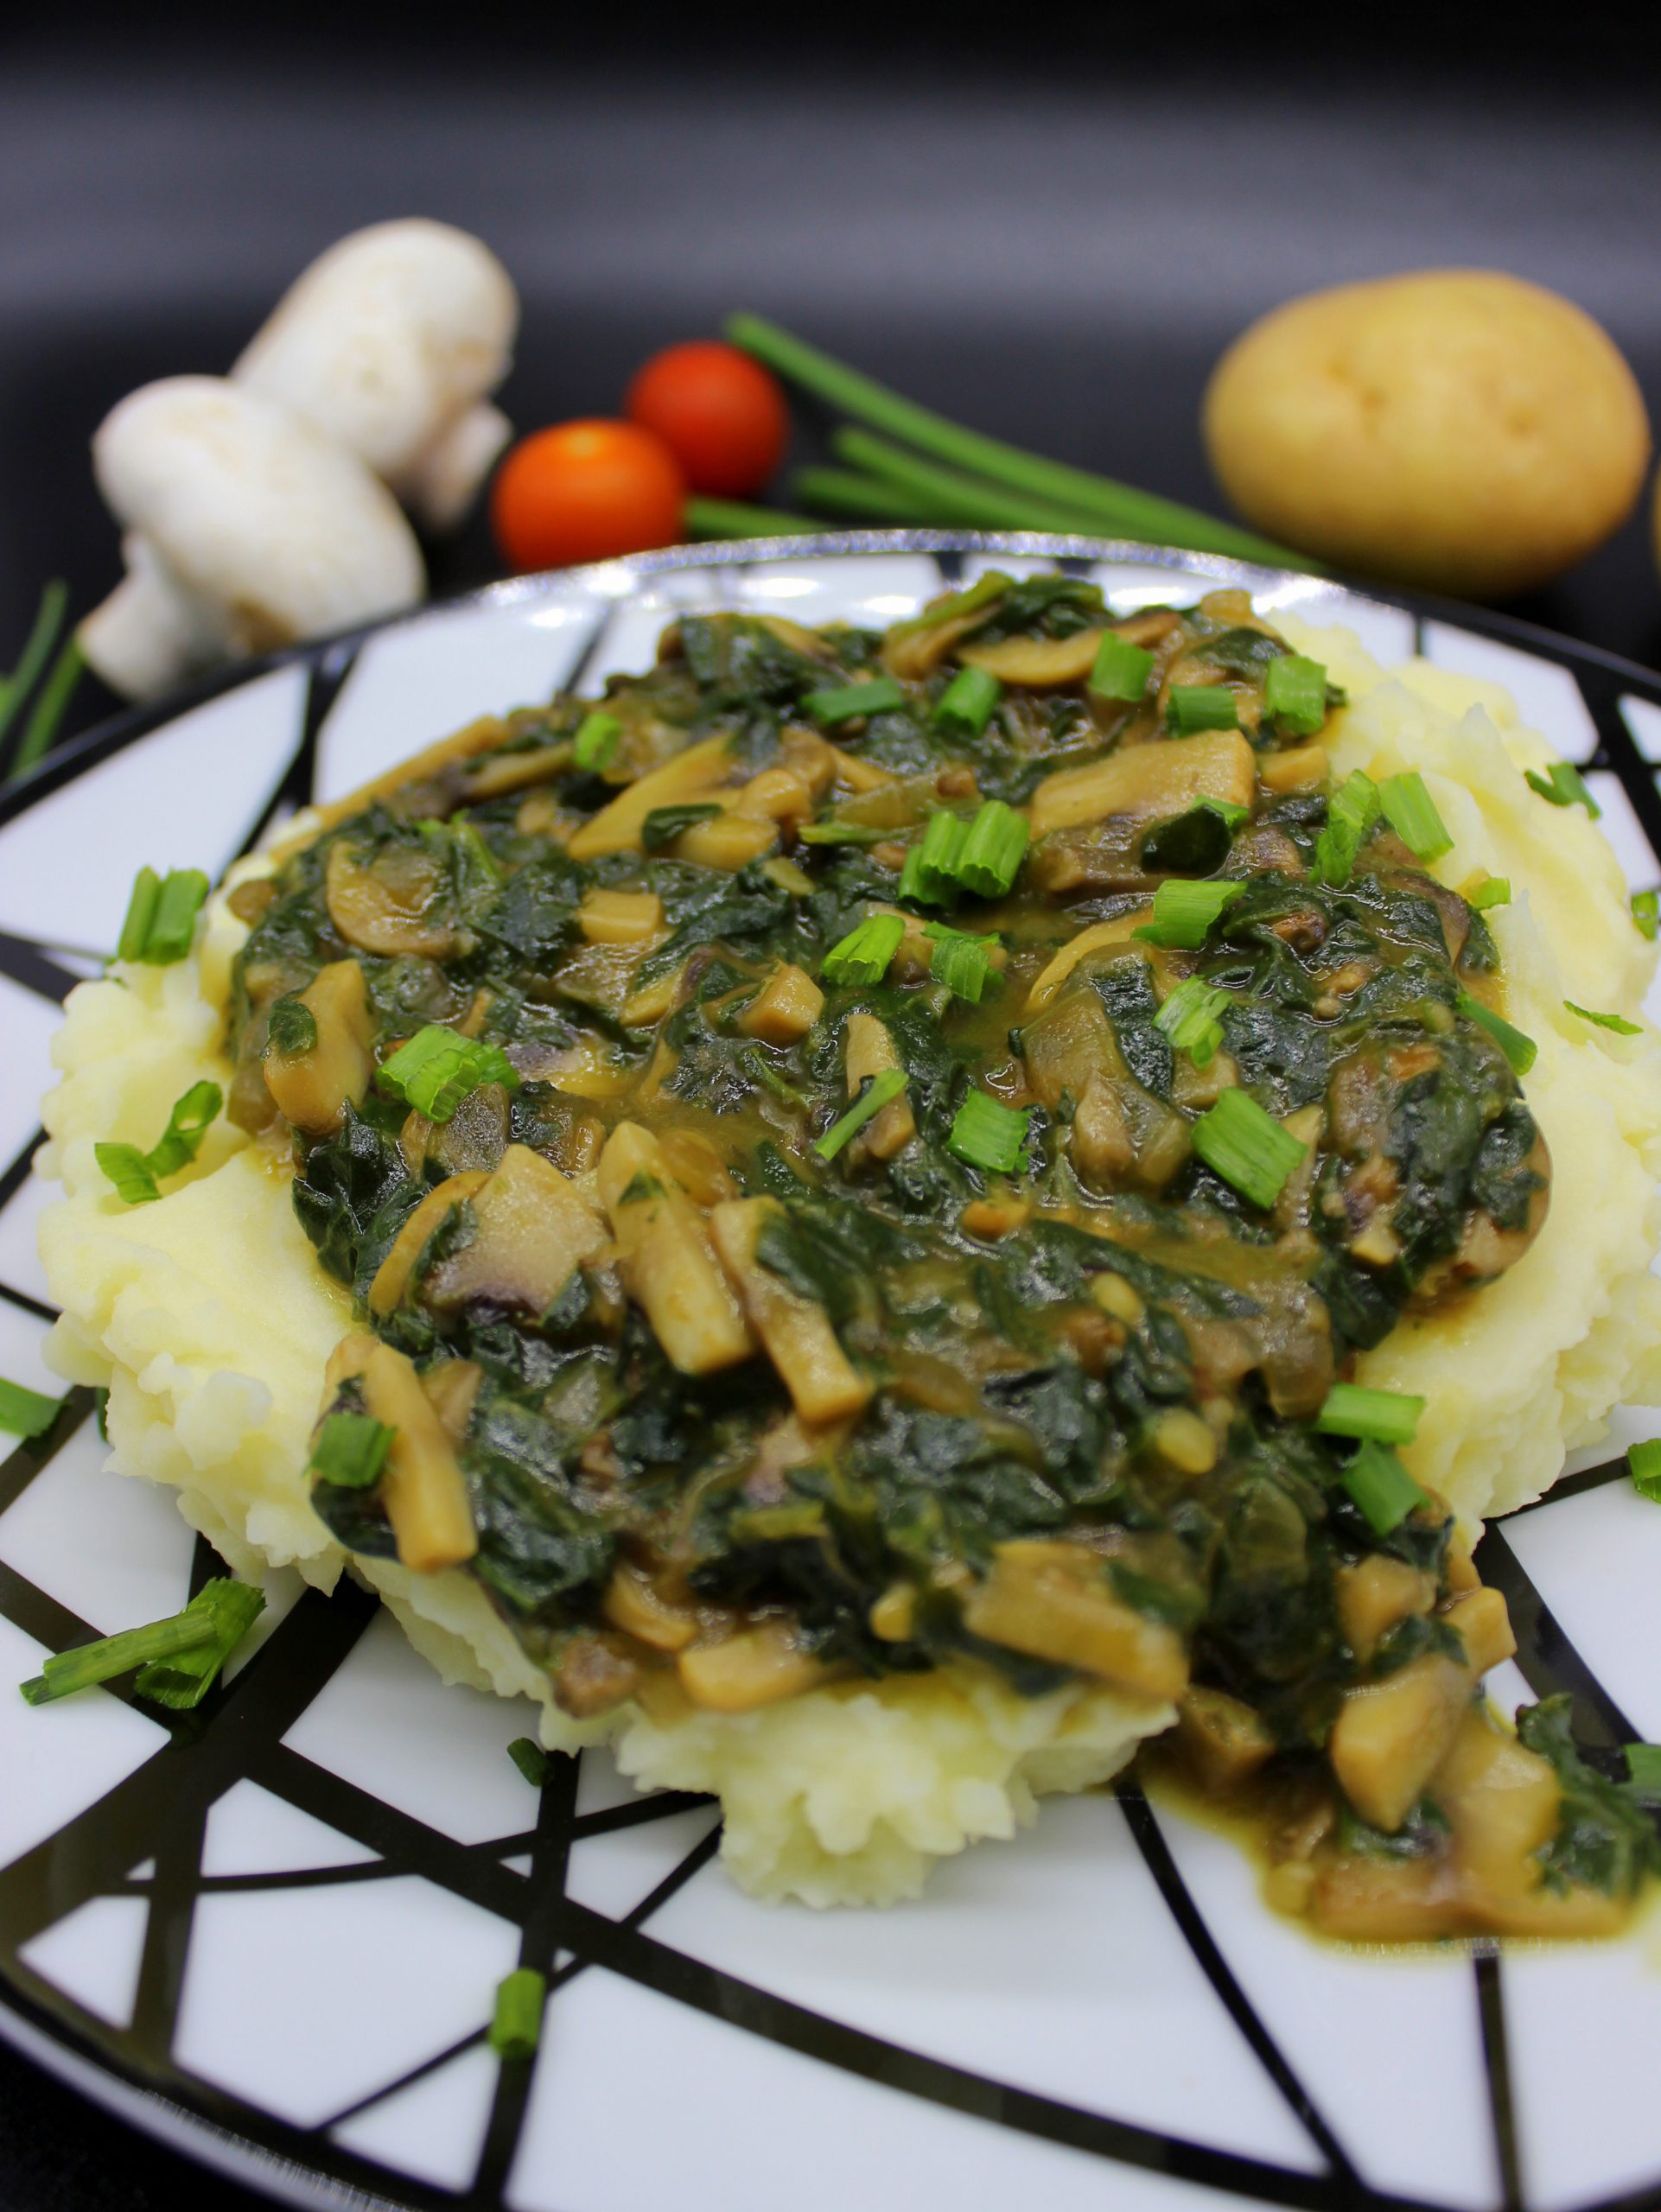 Vegan mashed potatoes with mushroom and spinach gravy - Bunny Mommy Cooks